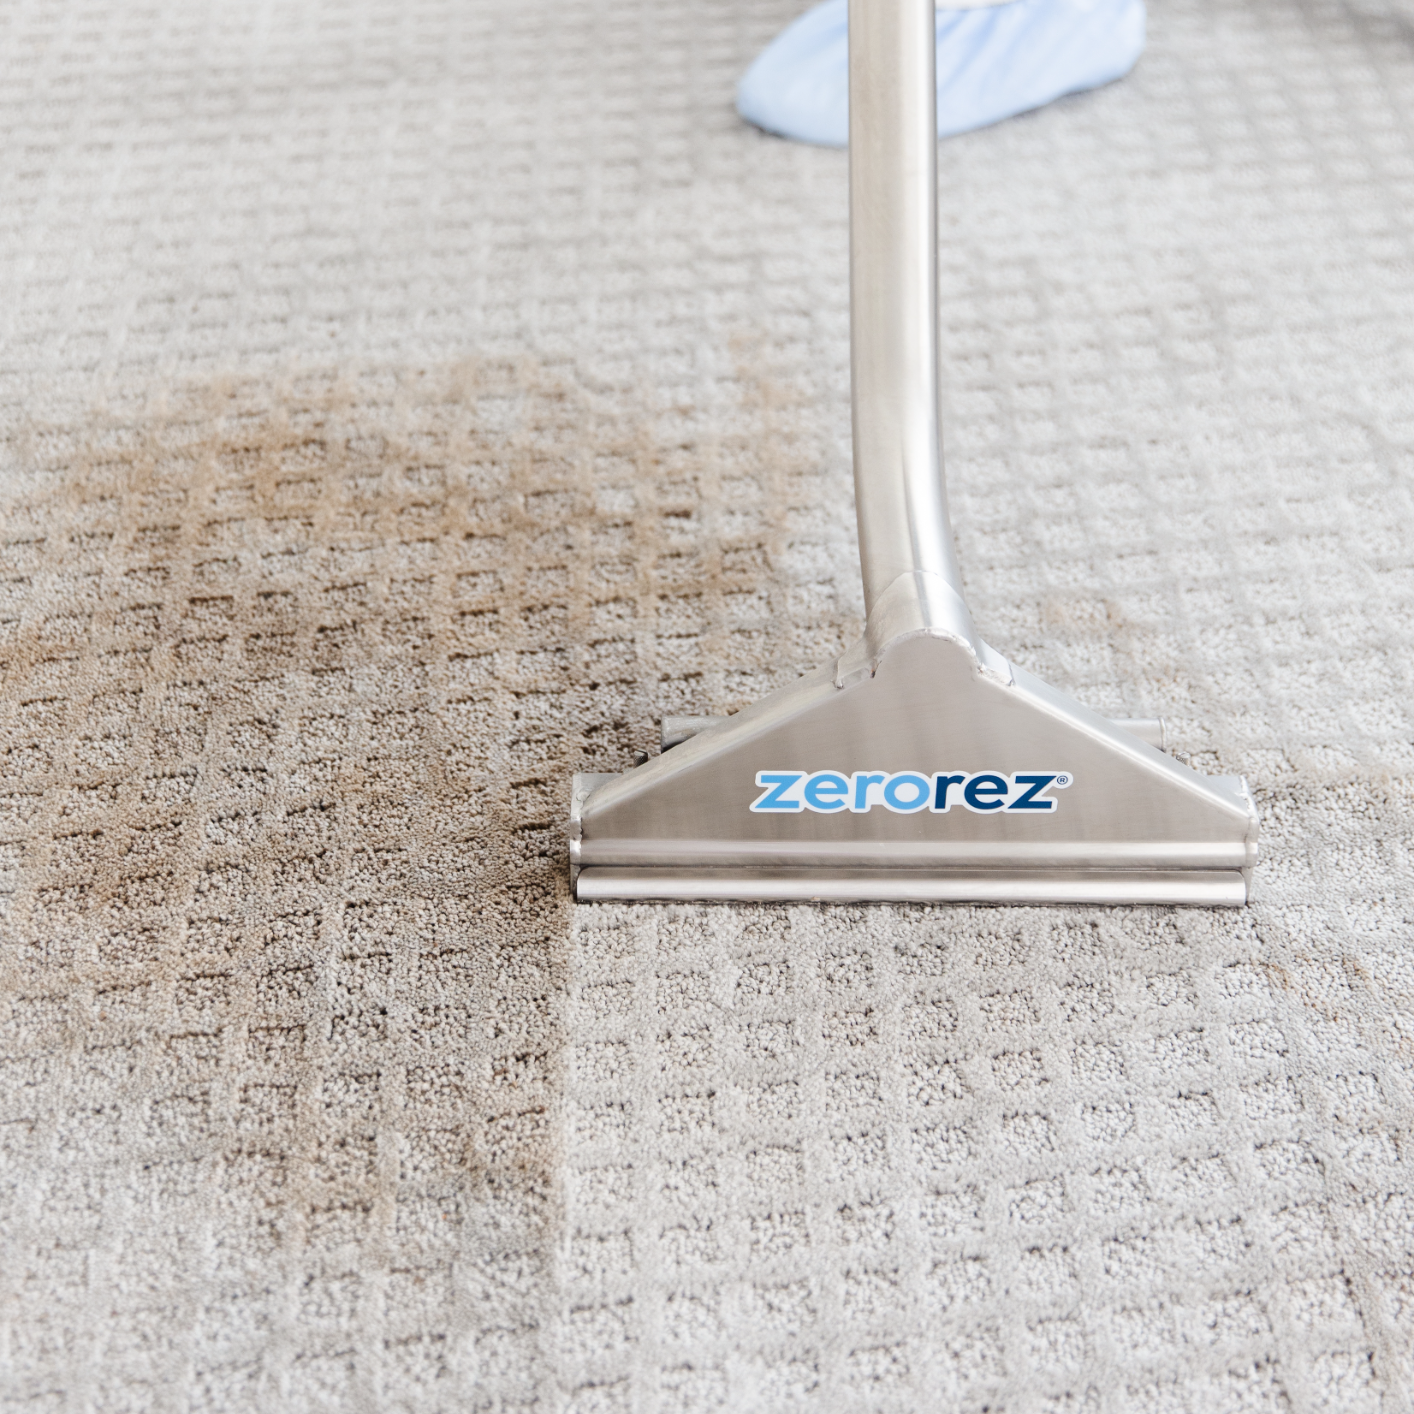 Zerorez professionally removes carpet wicking stains for good with its proprietary Zr™ Wand